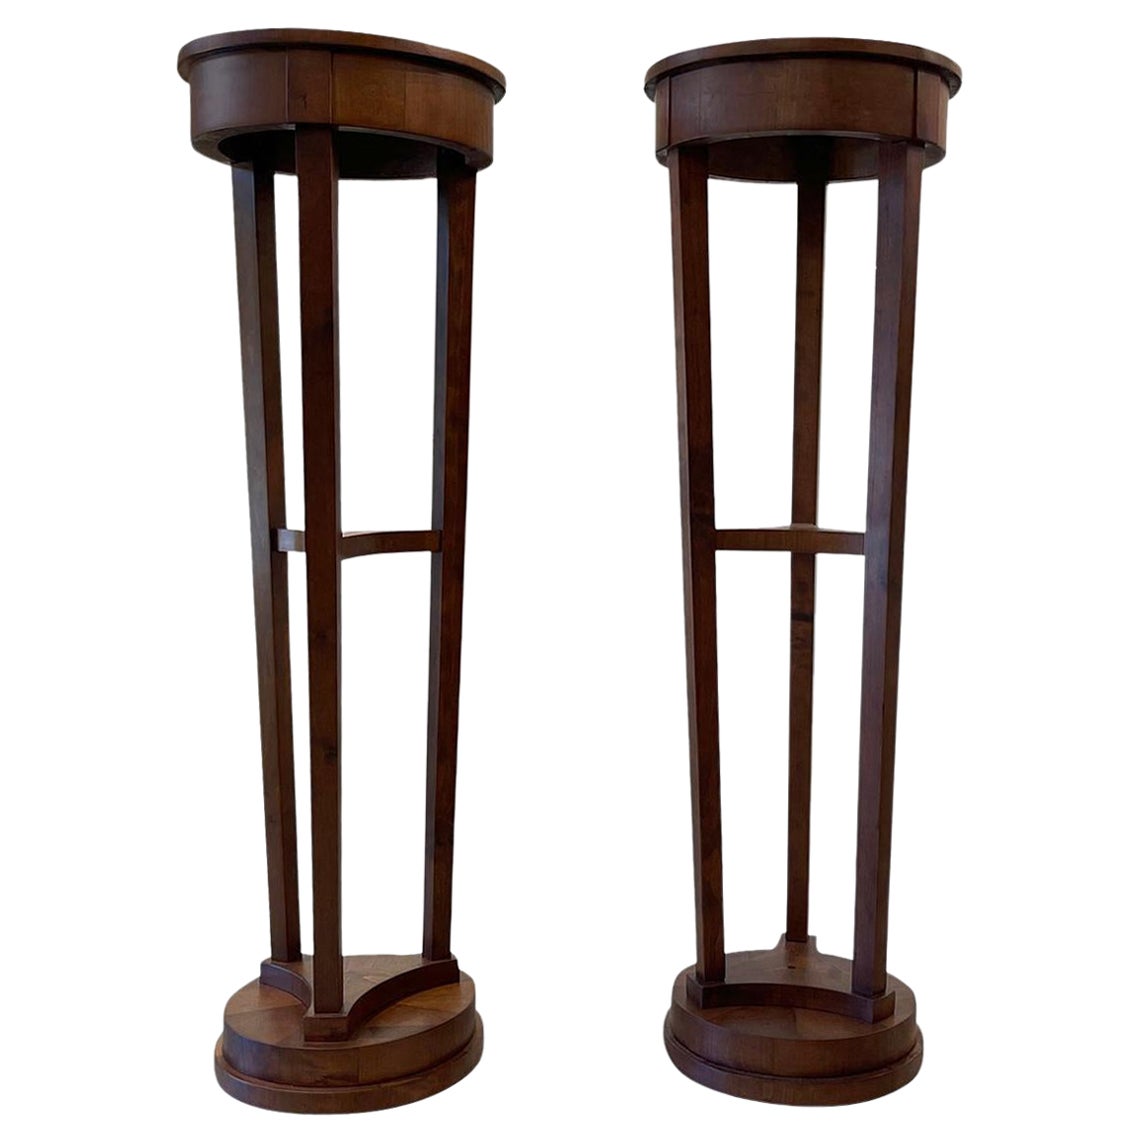 19th Century French Empire Pair of Antique Polished Mahogany Pedestals im Angebot